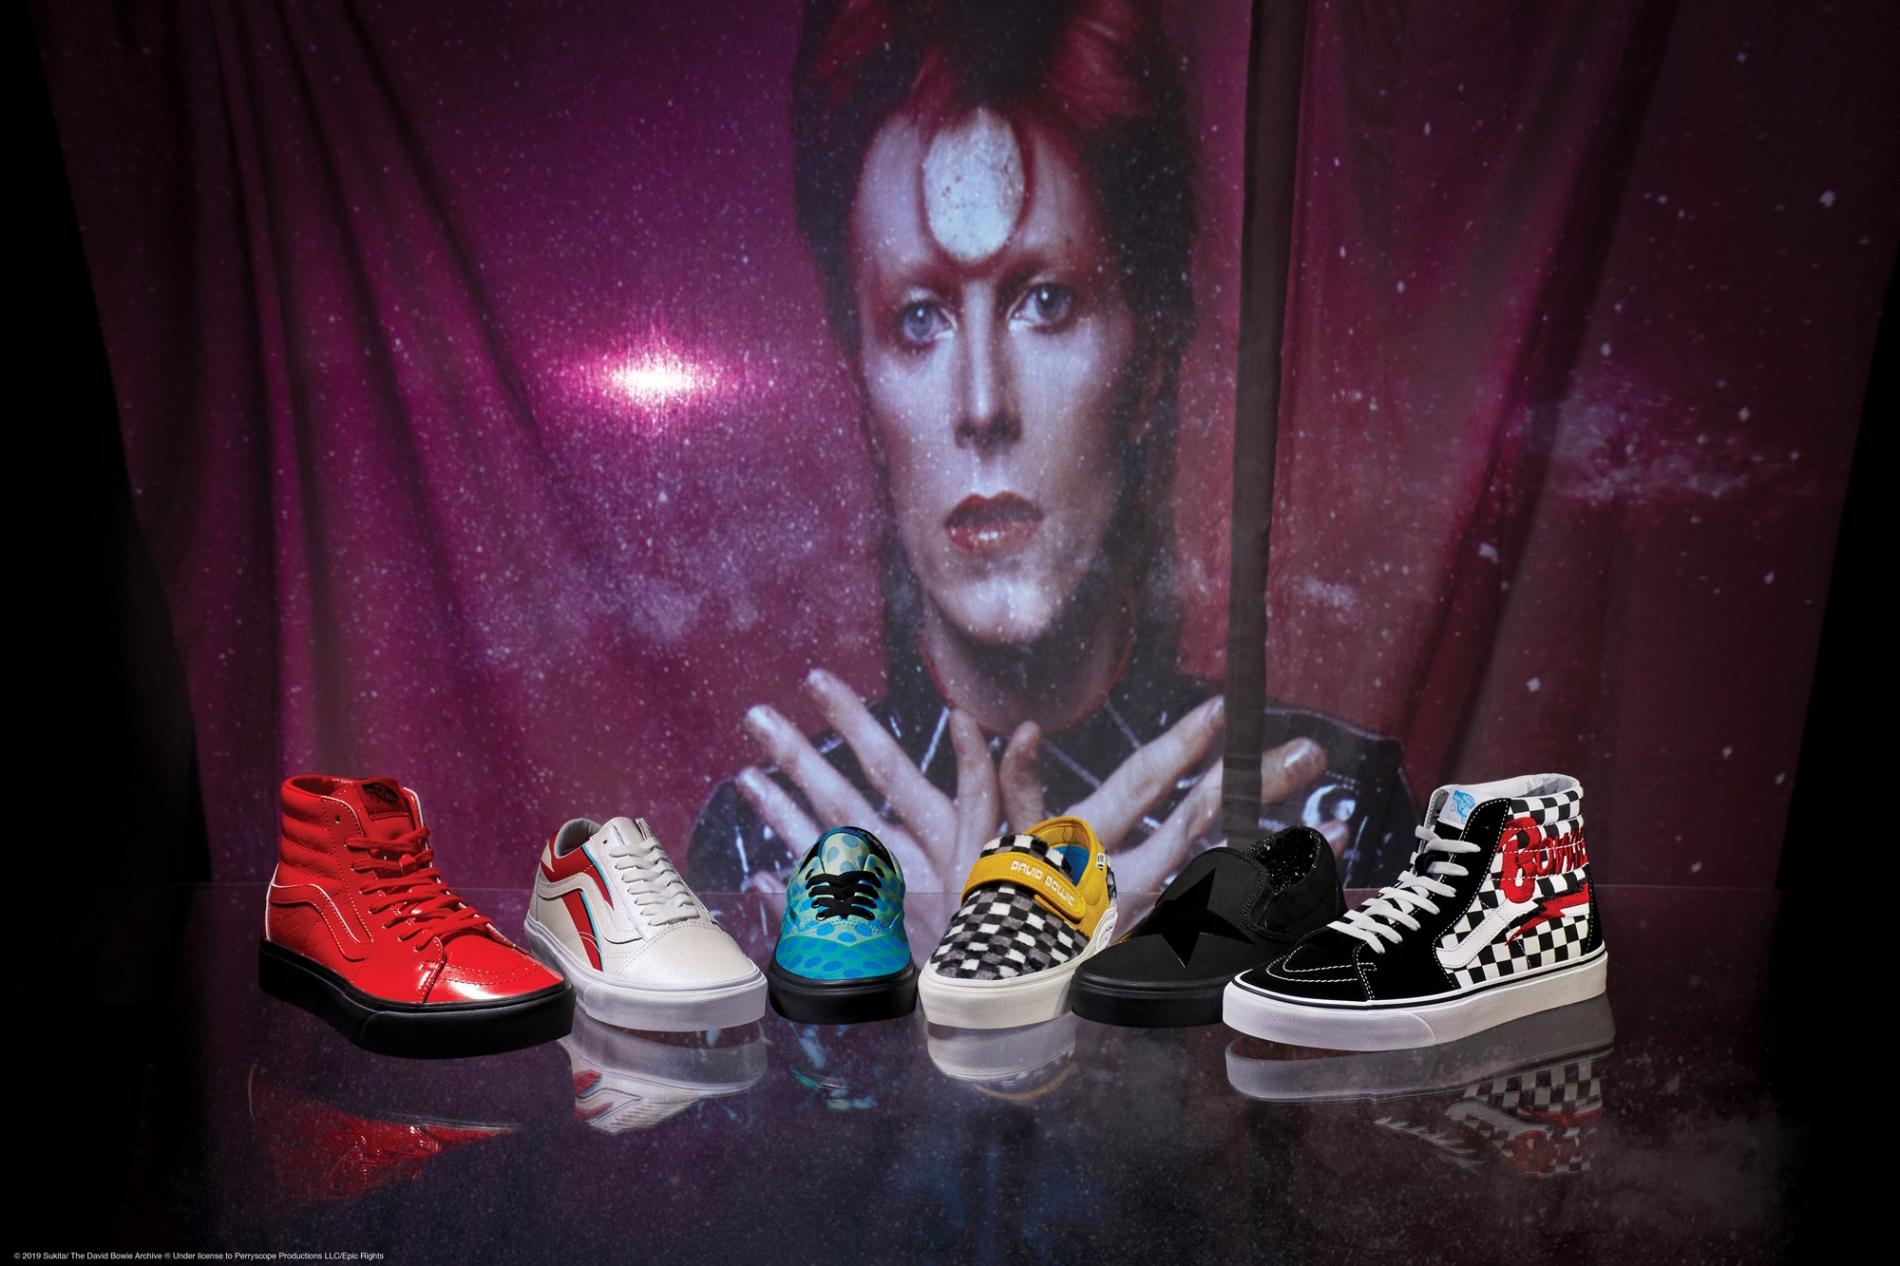 hunky dory david bowie vans